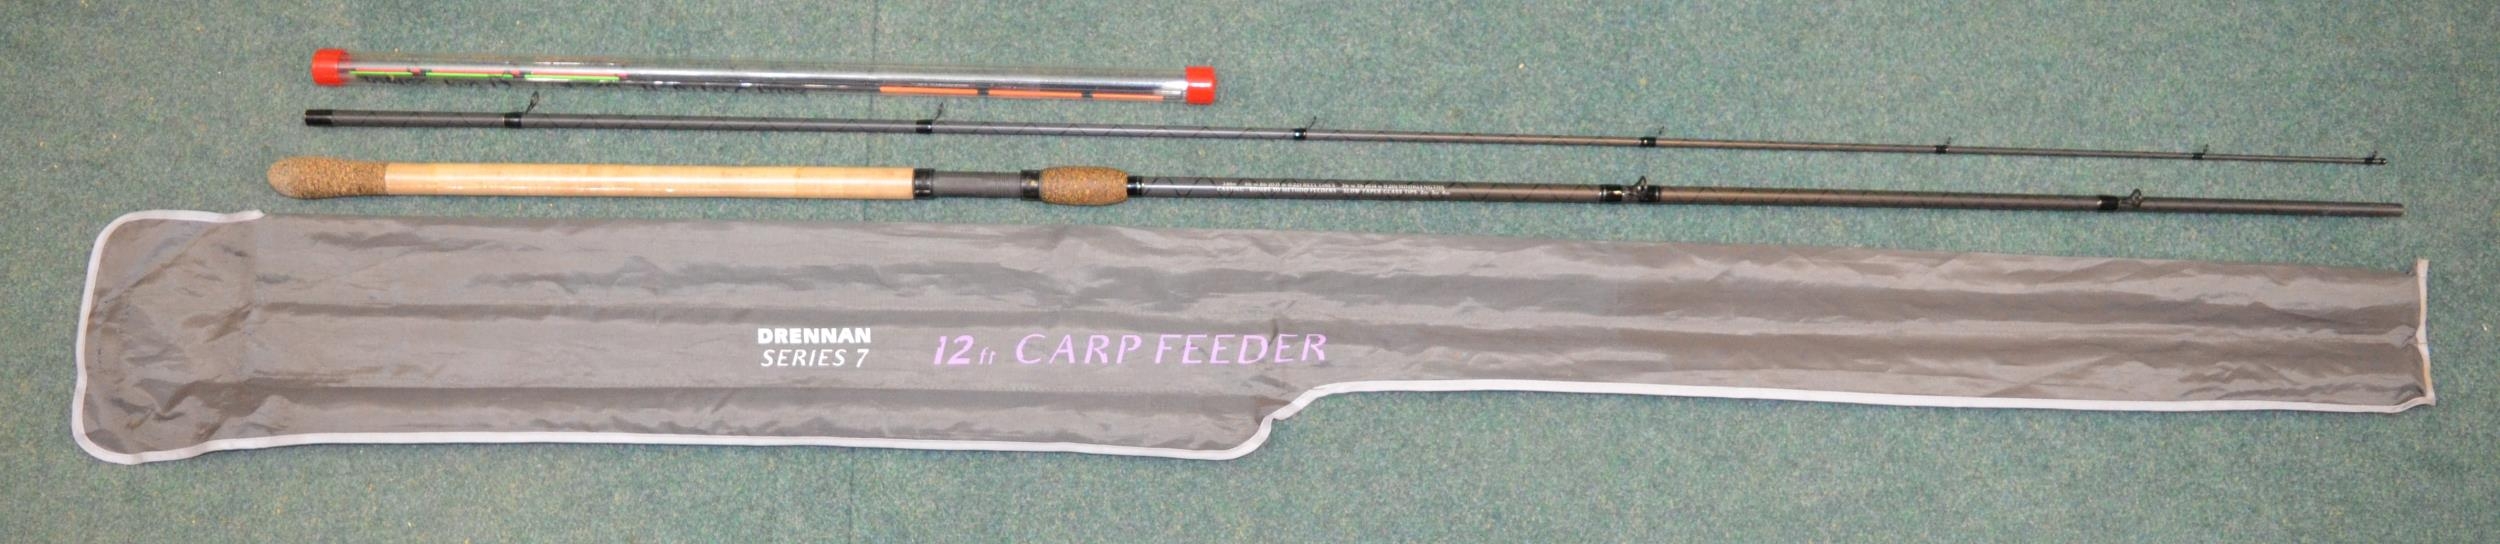 Lightly used Drennan series 7, 12ft carp feeder fishing rod with 3 quiver tips